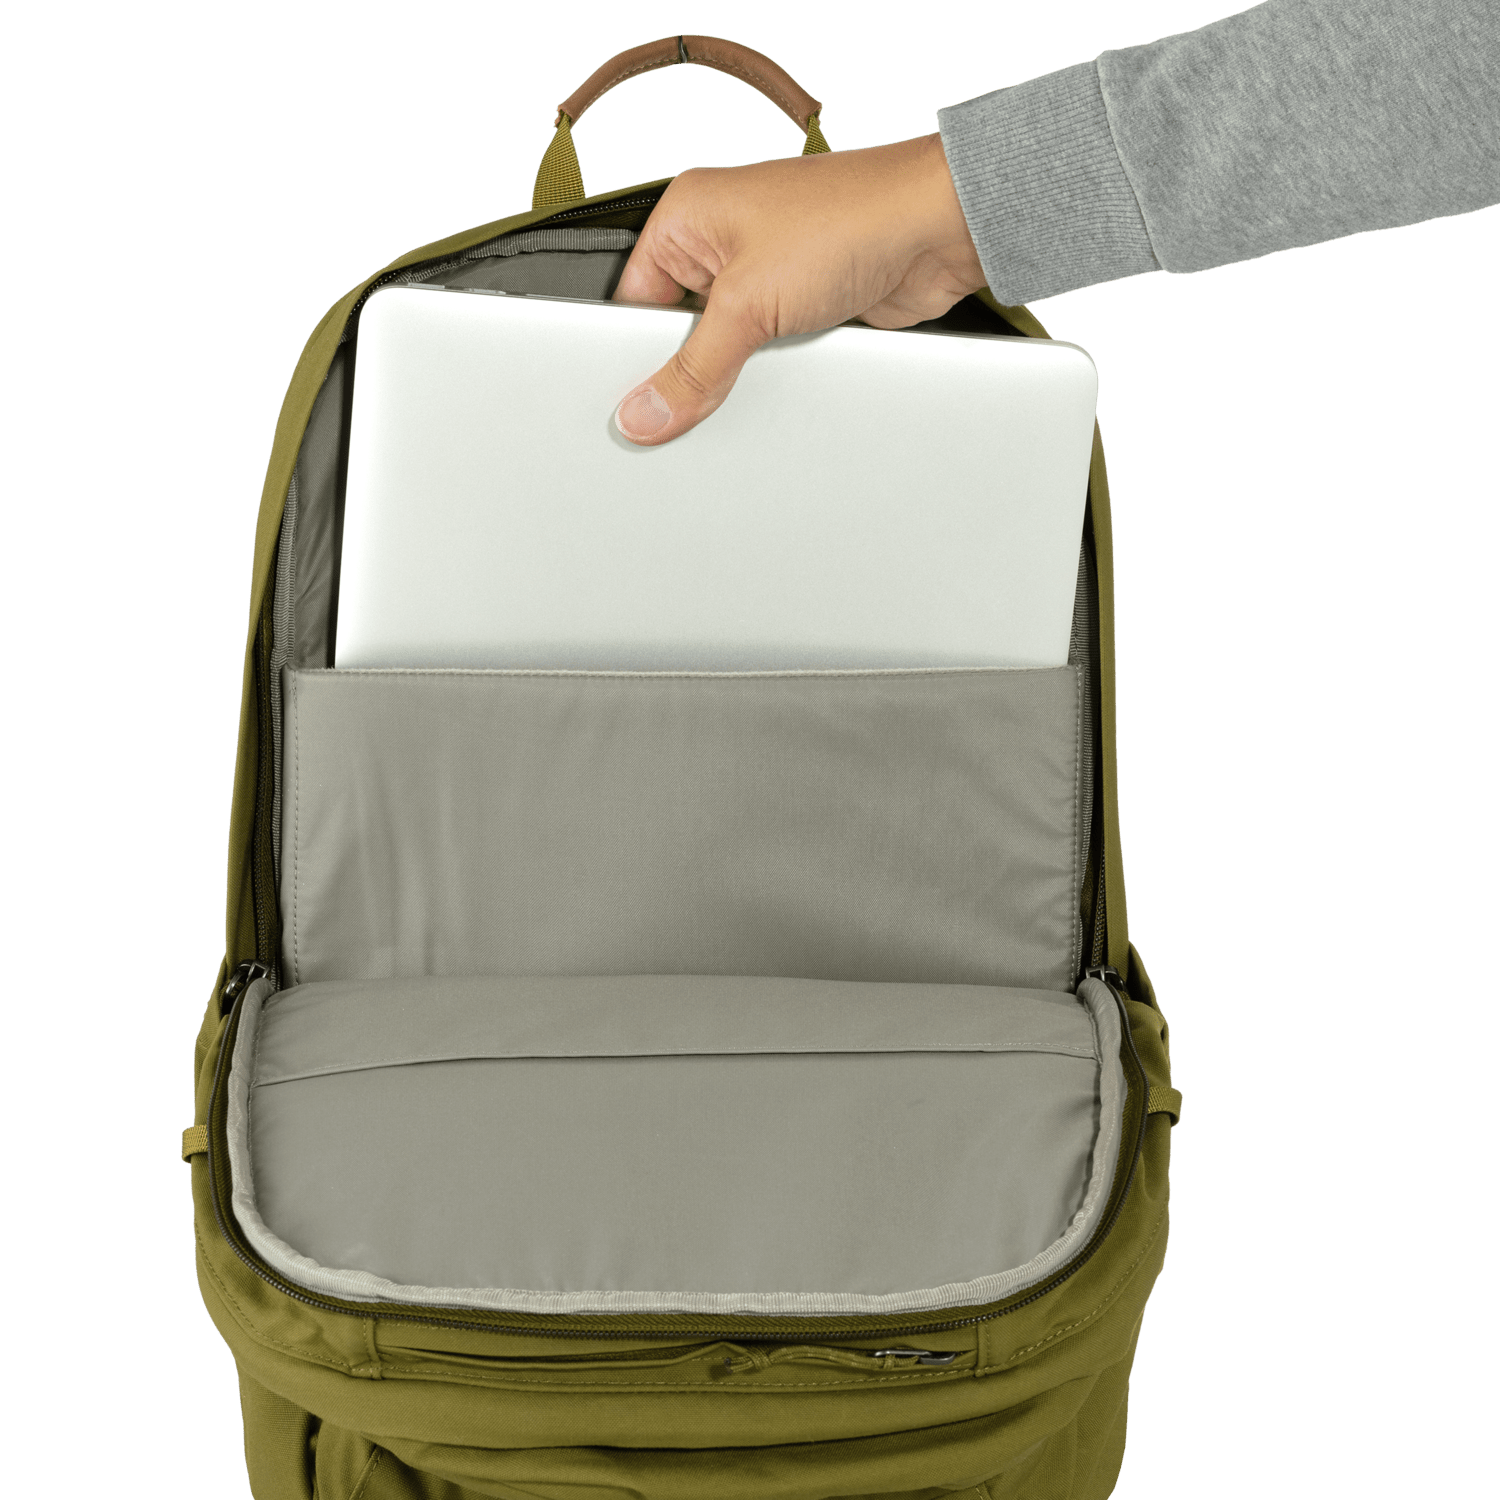 Fjällräven Räven 28l backpack - Recycled Polyester & Organic Cotton Khaki Dust Bags